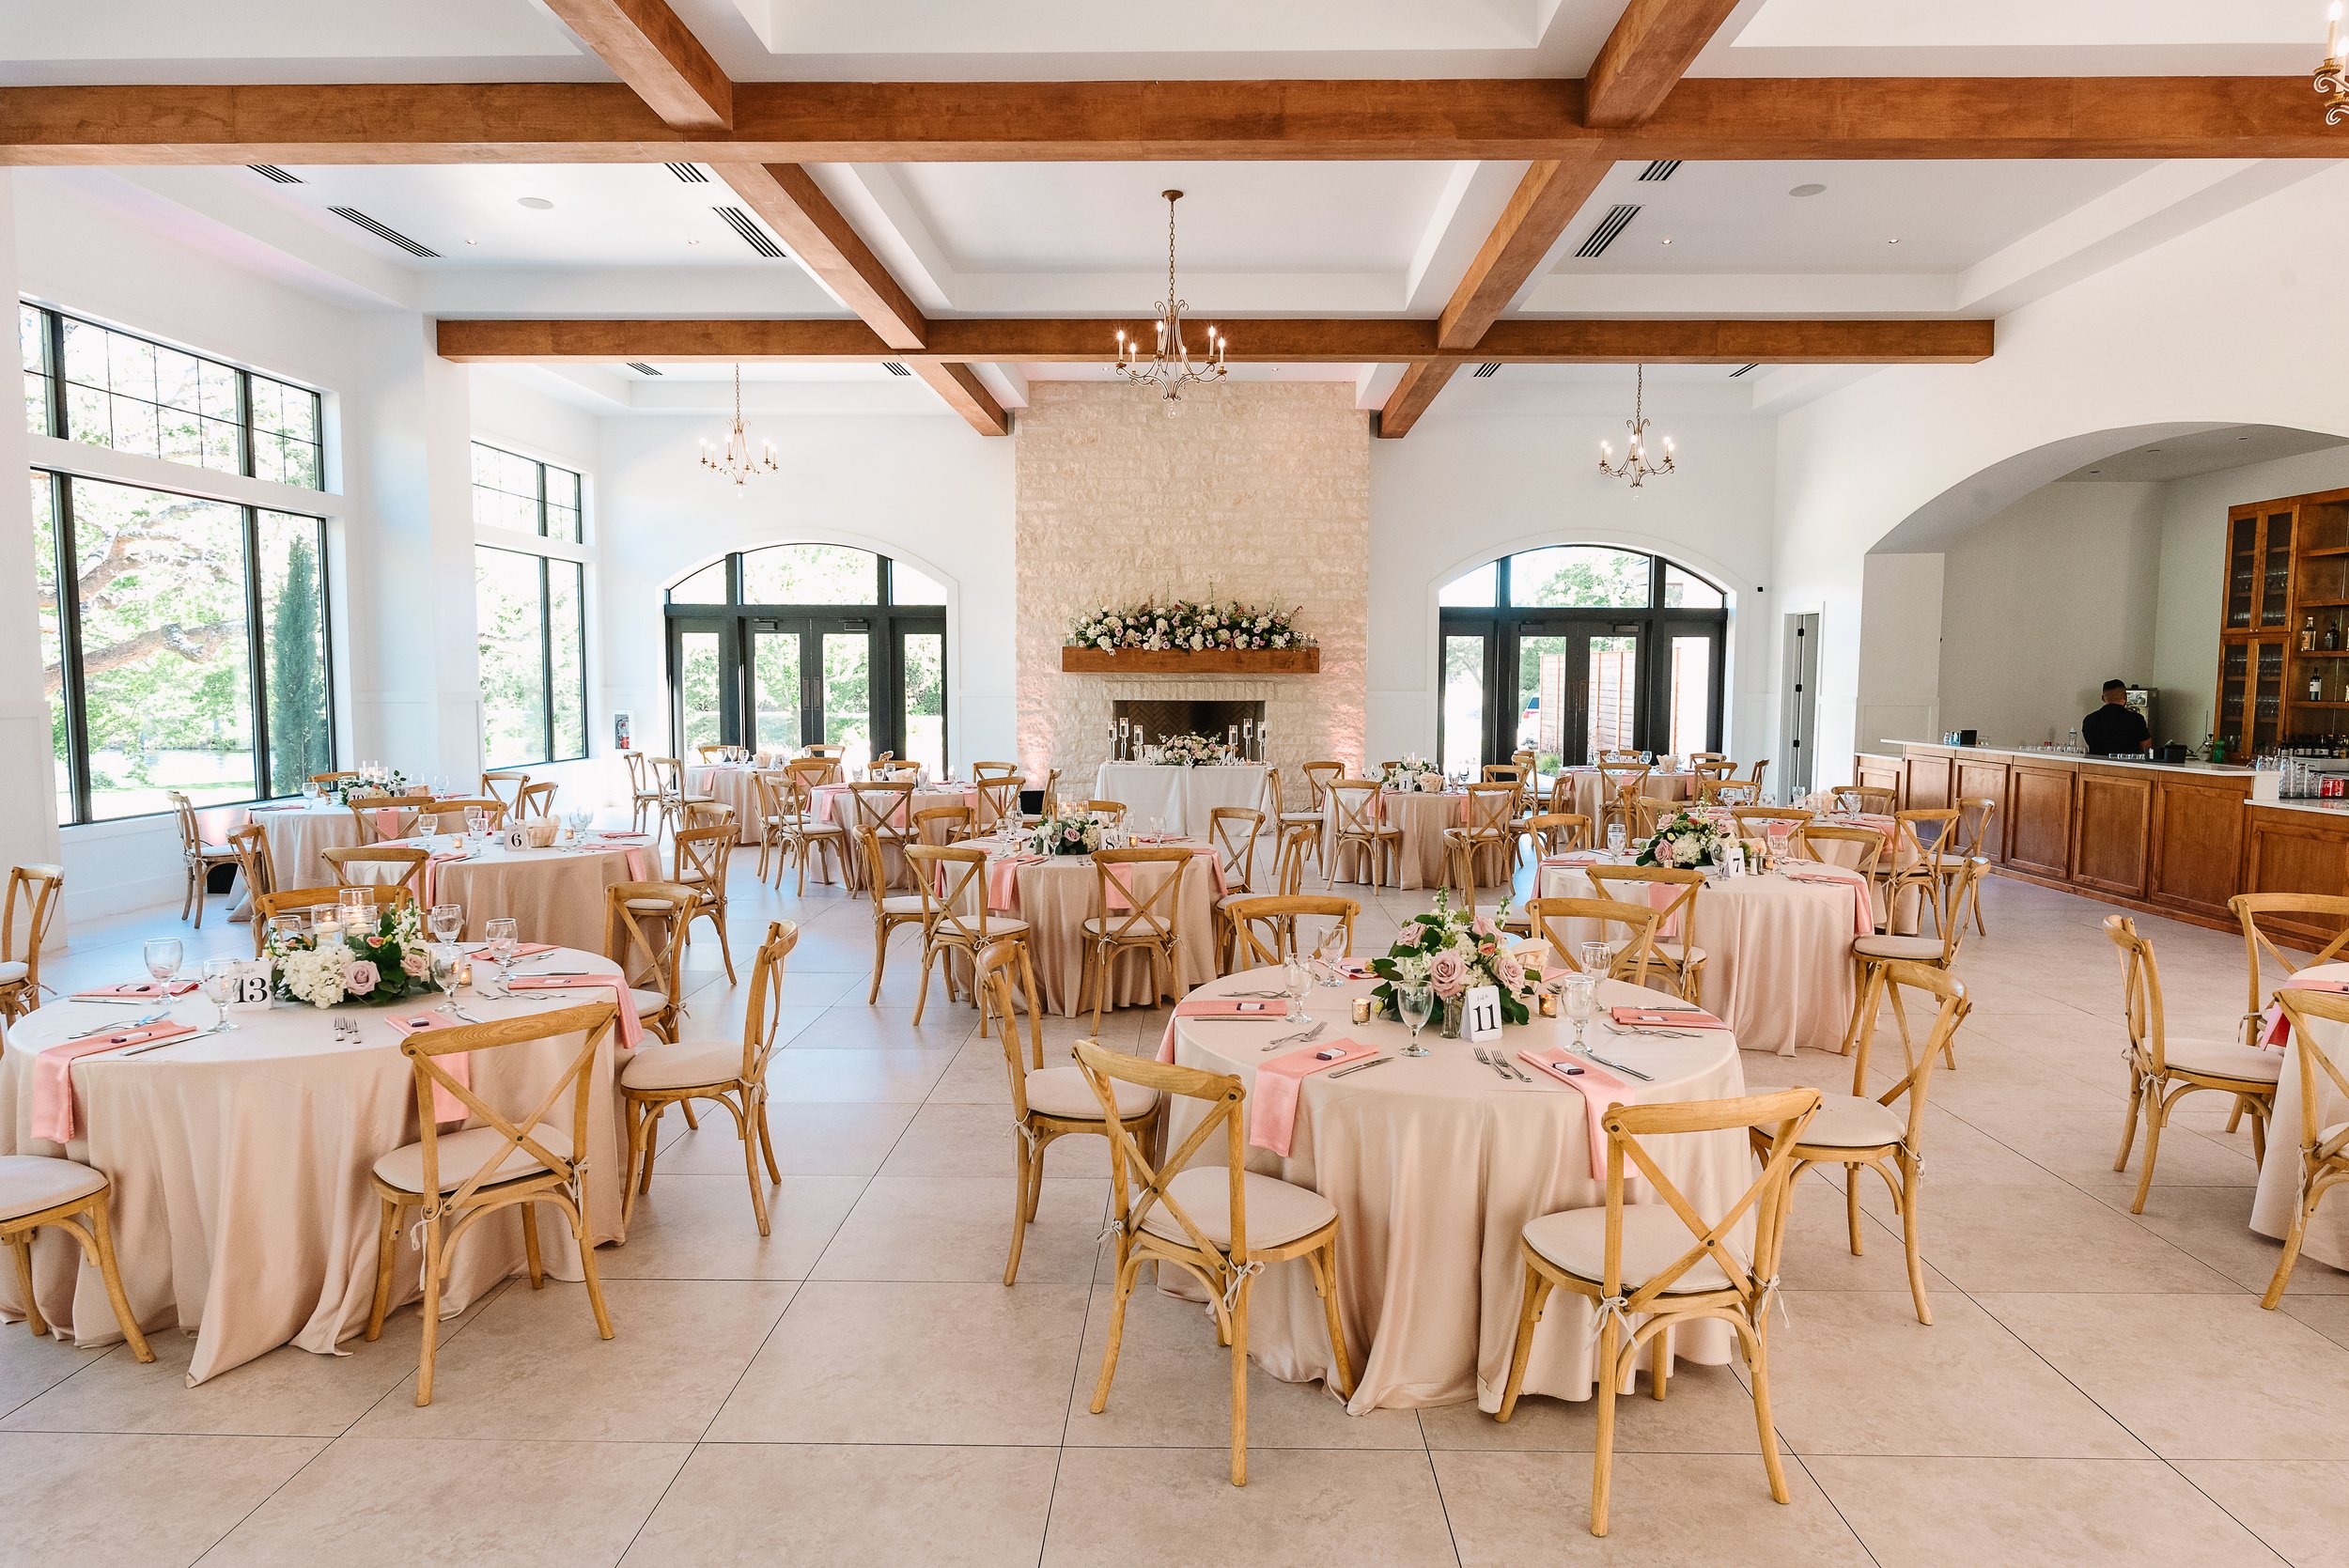 Create lasting memories at stunning Texas wedding venues. Explore our top picks for your unforgettable celebration.